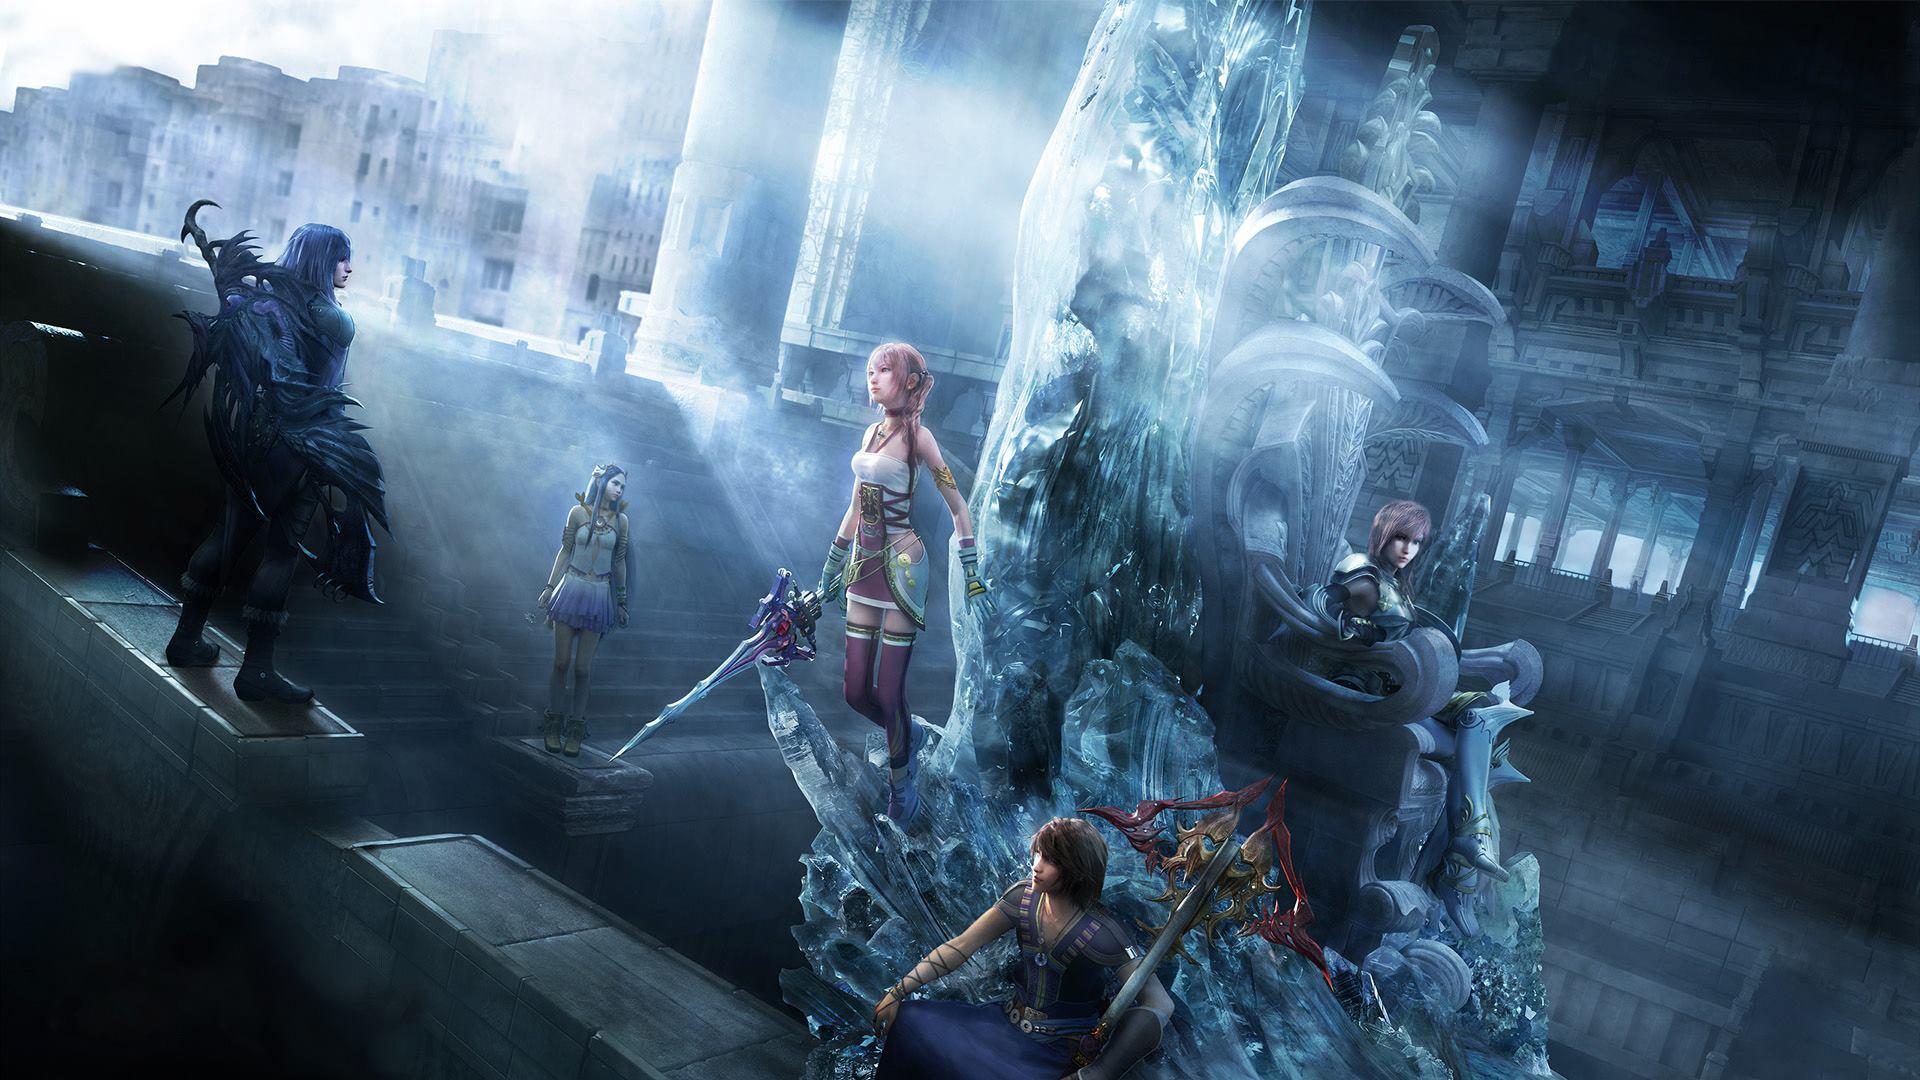 Final Fantasy XIII 2 (Video Game)